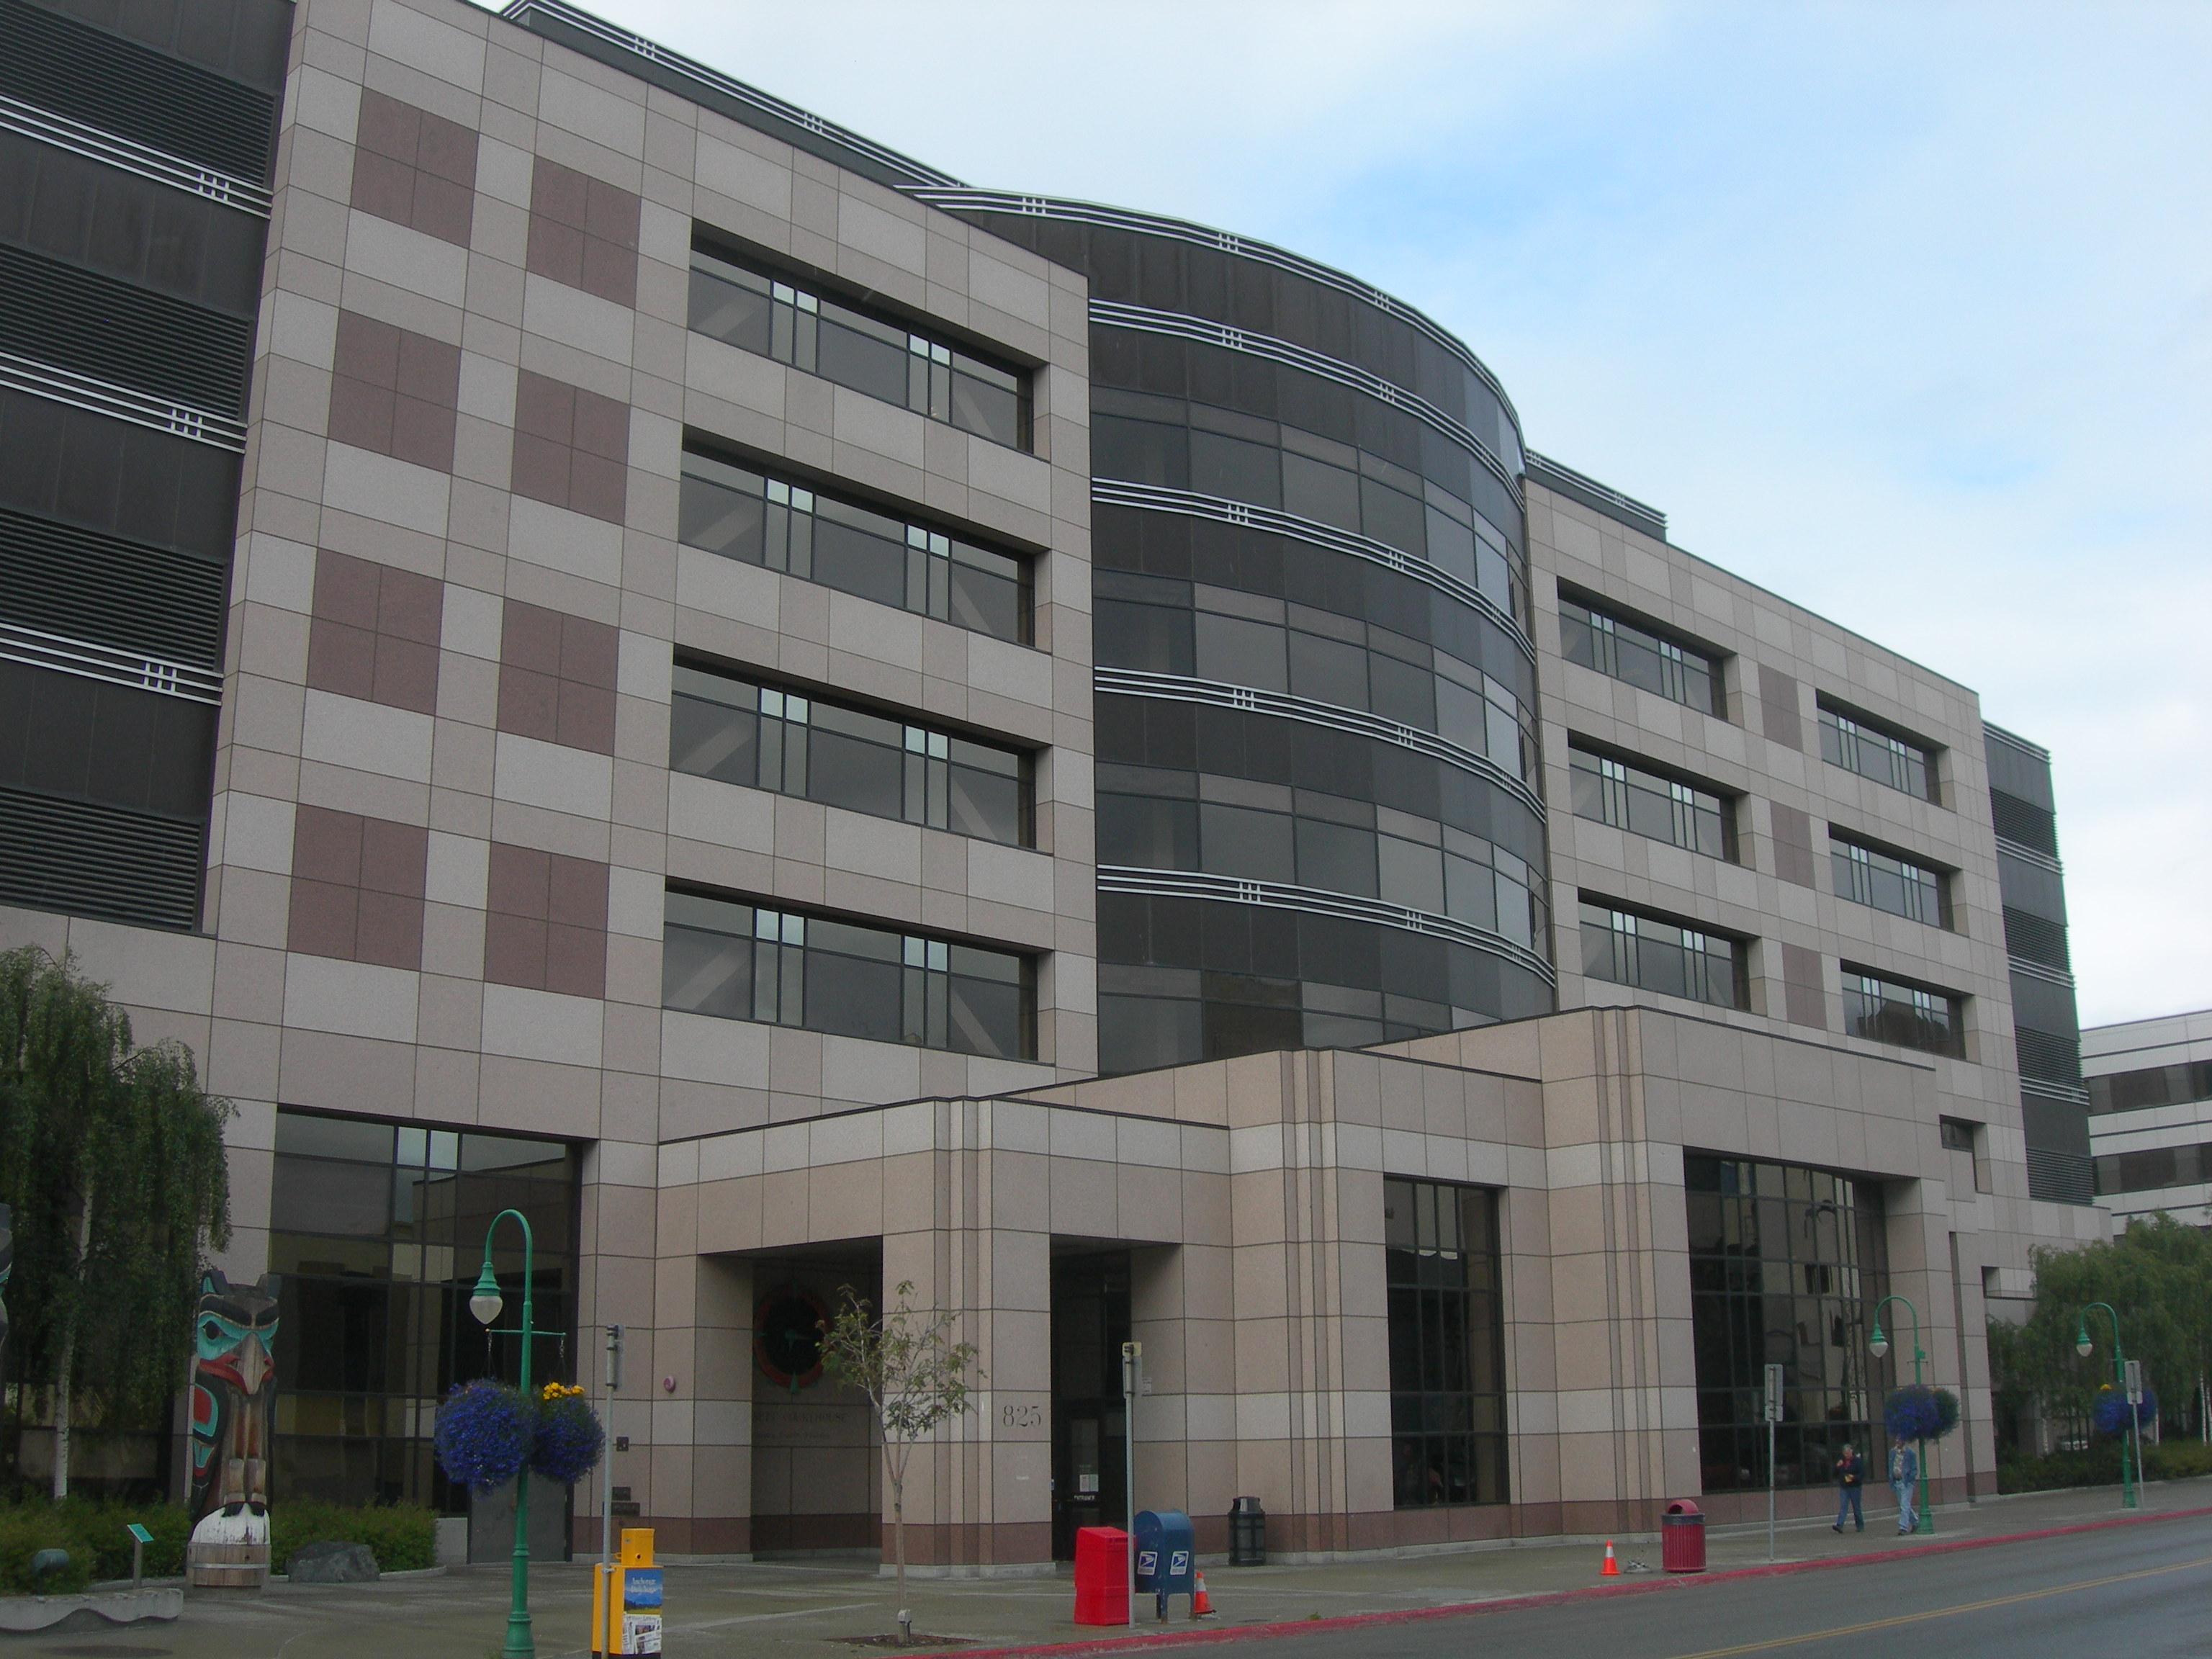 Constructed in 1996 beside the previous courthouse. It holds the trial courts for the City and Borough of Anchorage. (Creative Commons photo courtesy Jimmy Emerson)